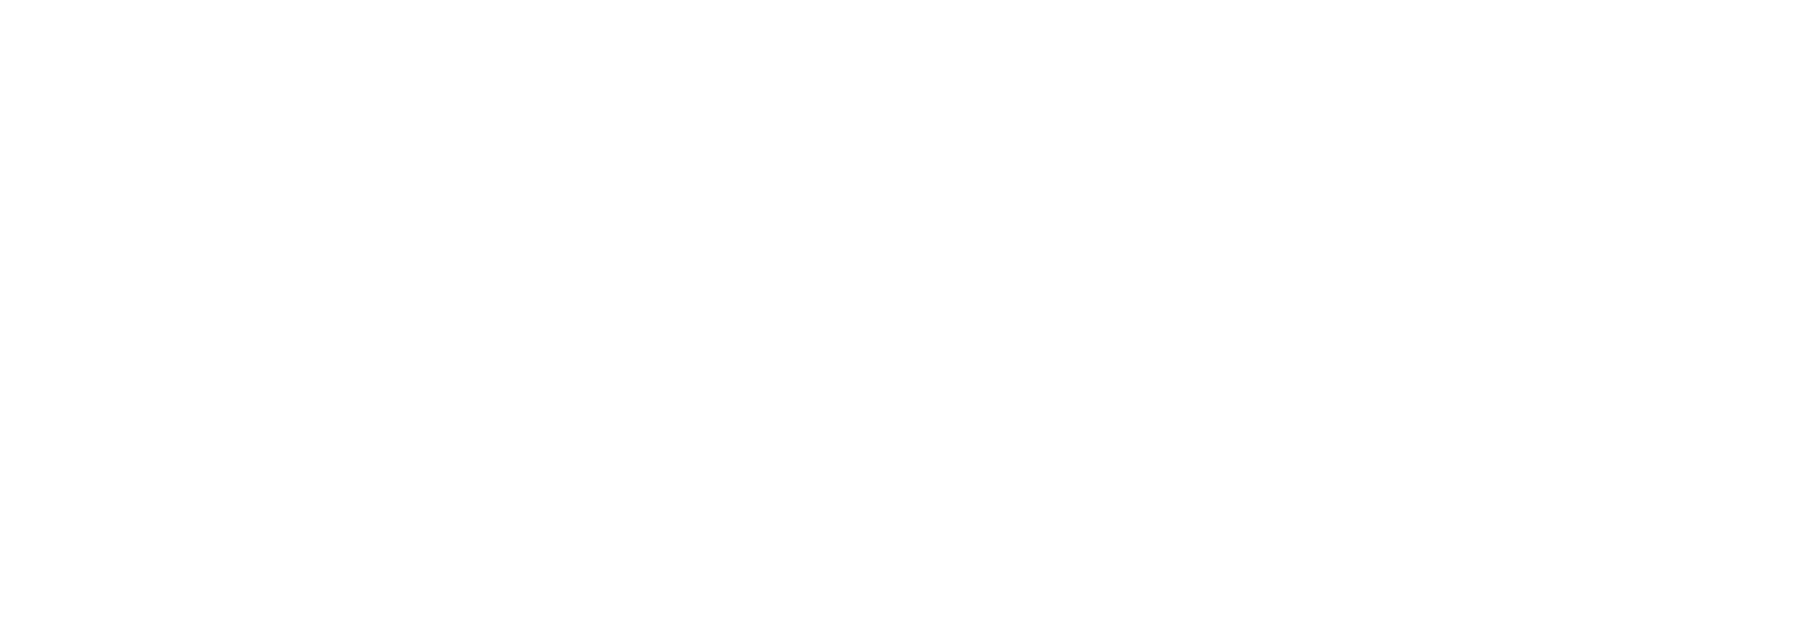 Fennell Family Wines Scrolled light version of the logo (Link to homepage)